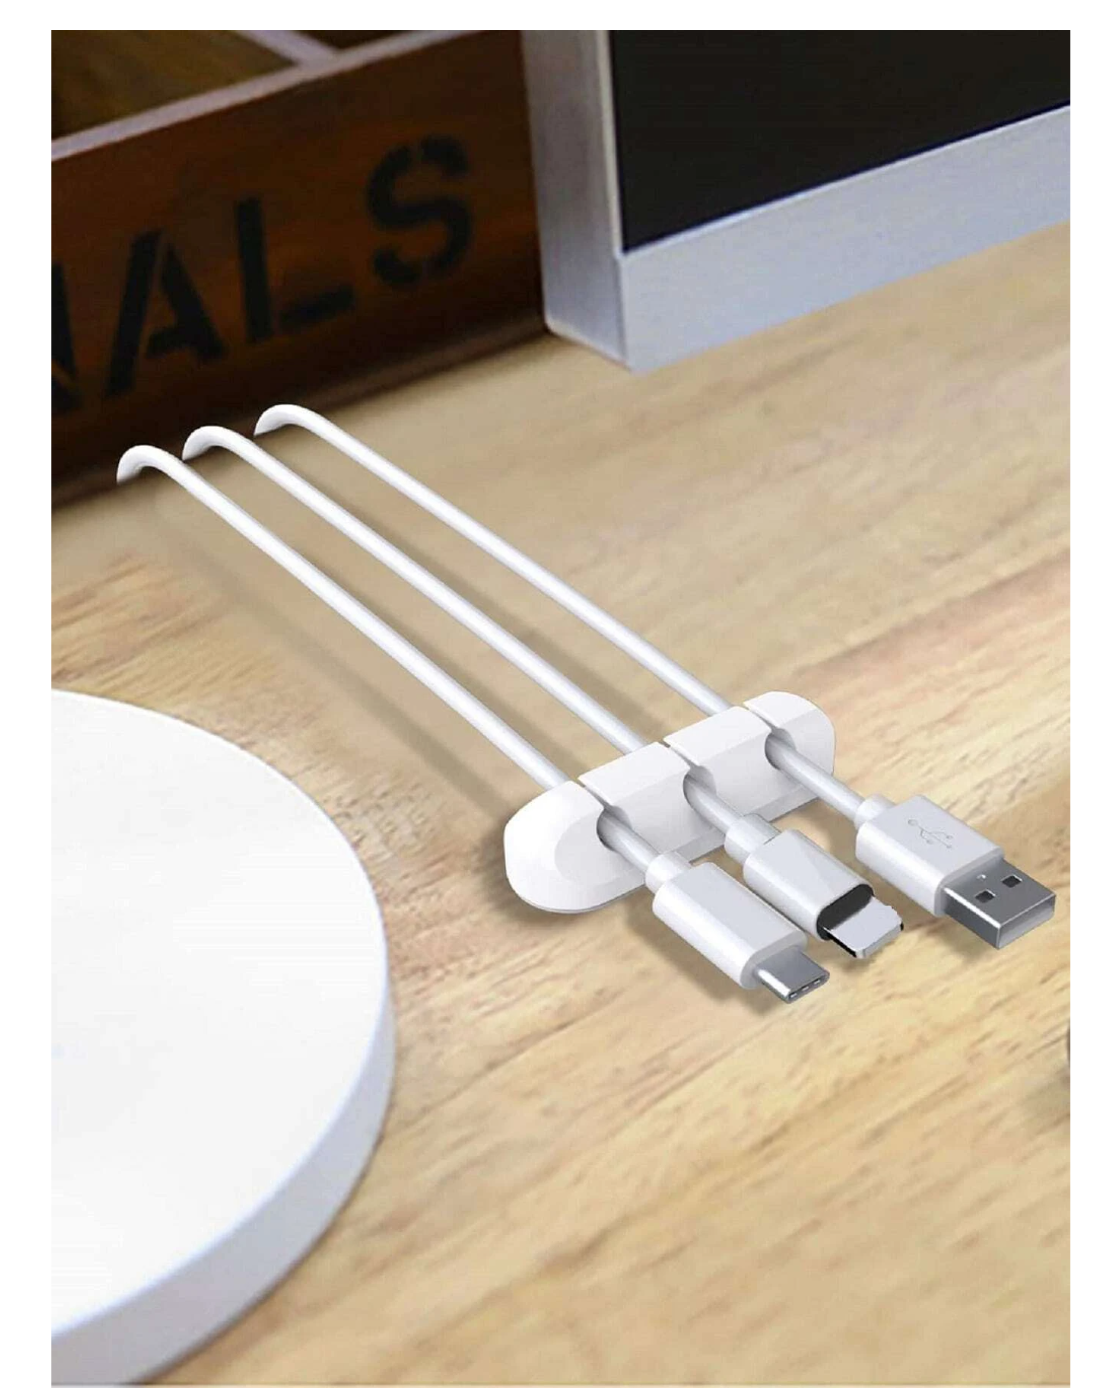 Clutter-Free Bliss: 2pcs White Cable Clip Cord – Your Ultimate Cable Management Solution for a Tidy Oasis in Car, Home, and Office!